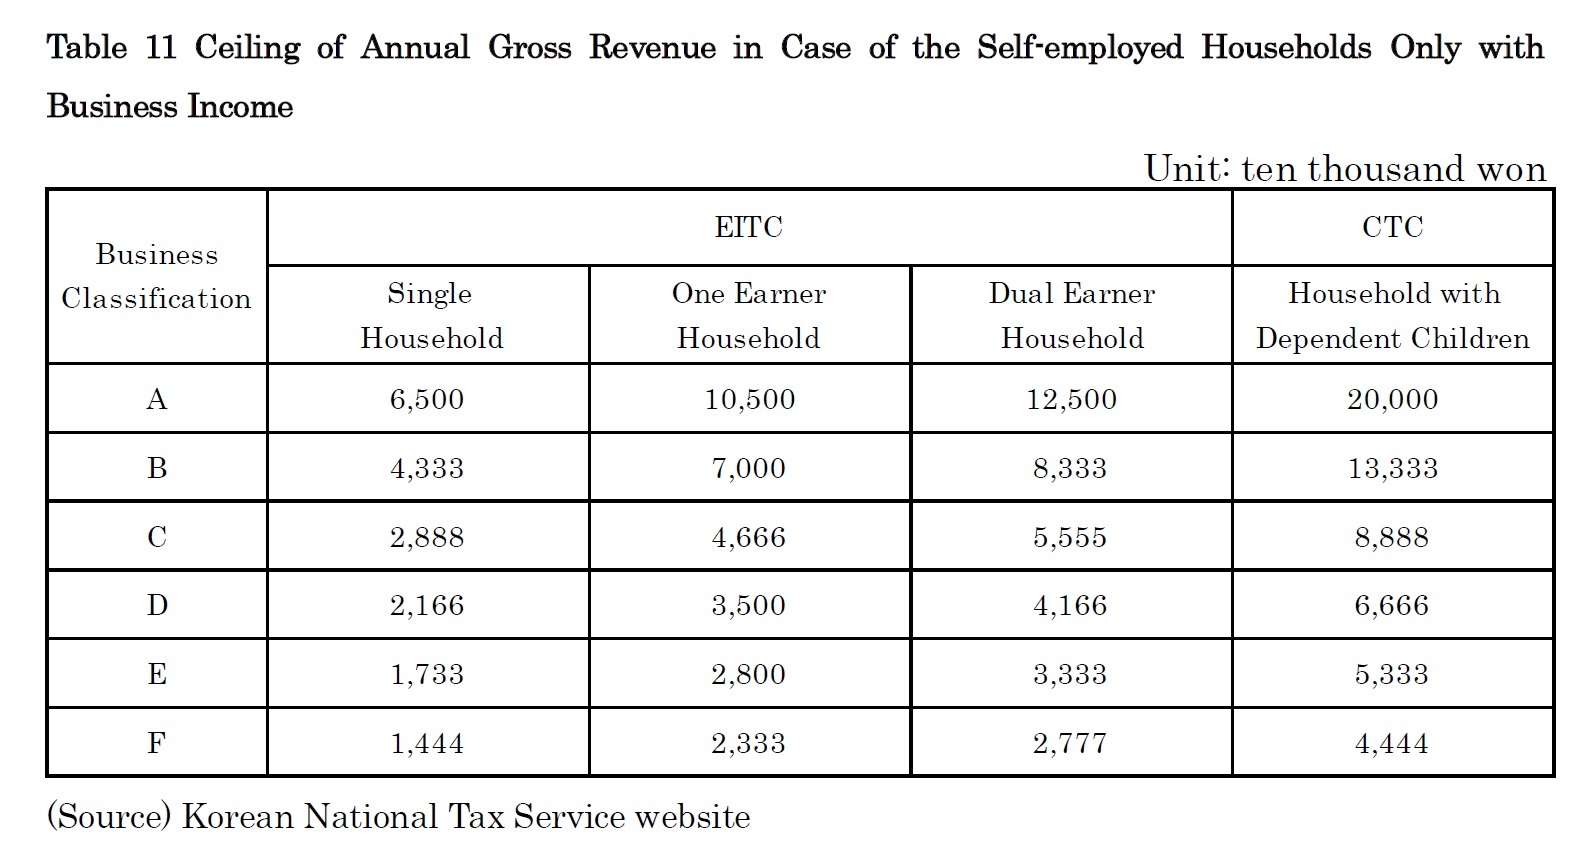 Table 11 Ceiling of Annual Gross Revenue in Case of the Self-employed Households Only with Business Income